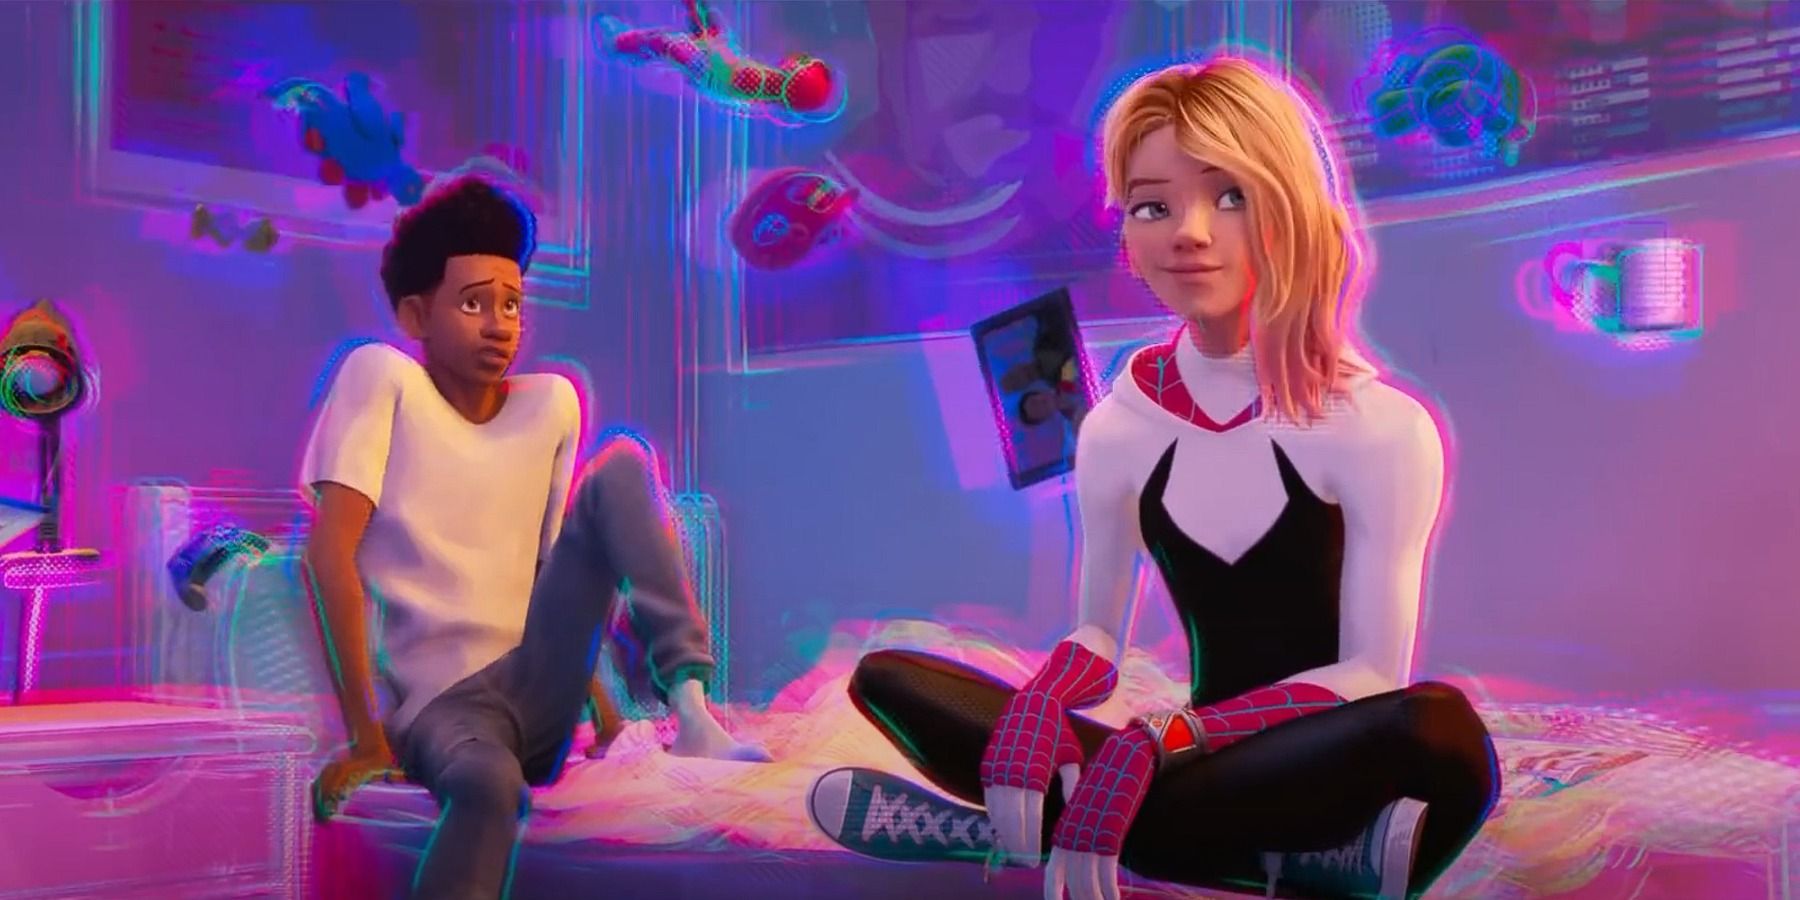 Miles and Gwen in bedroom Spider-Man: Across the Spider-Verse trailer